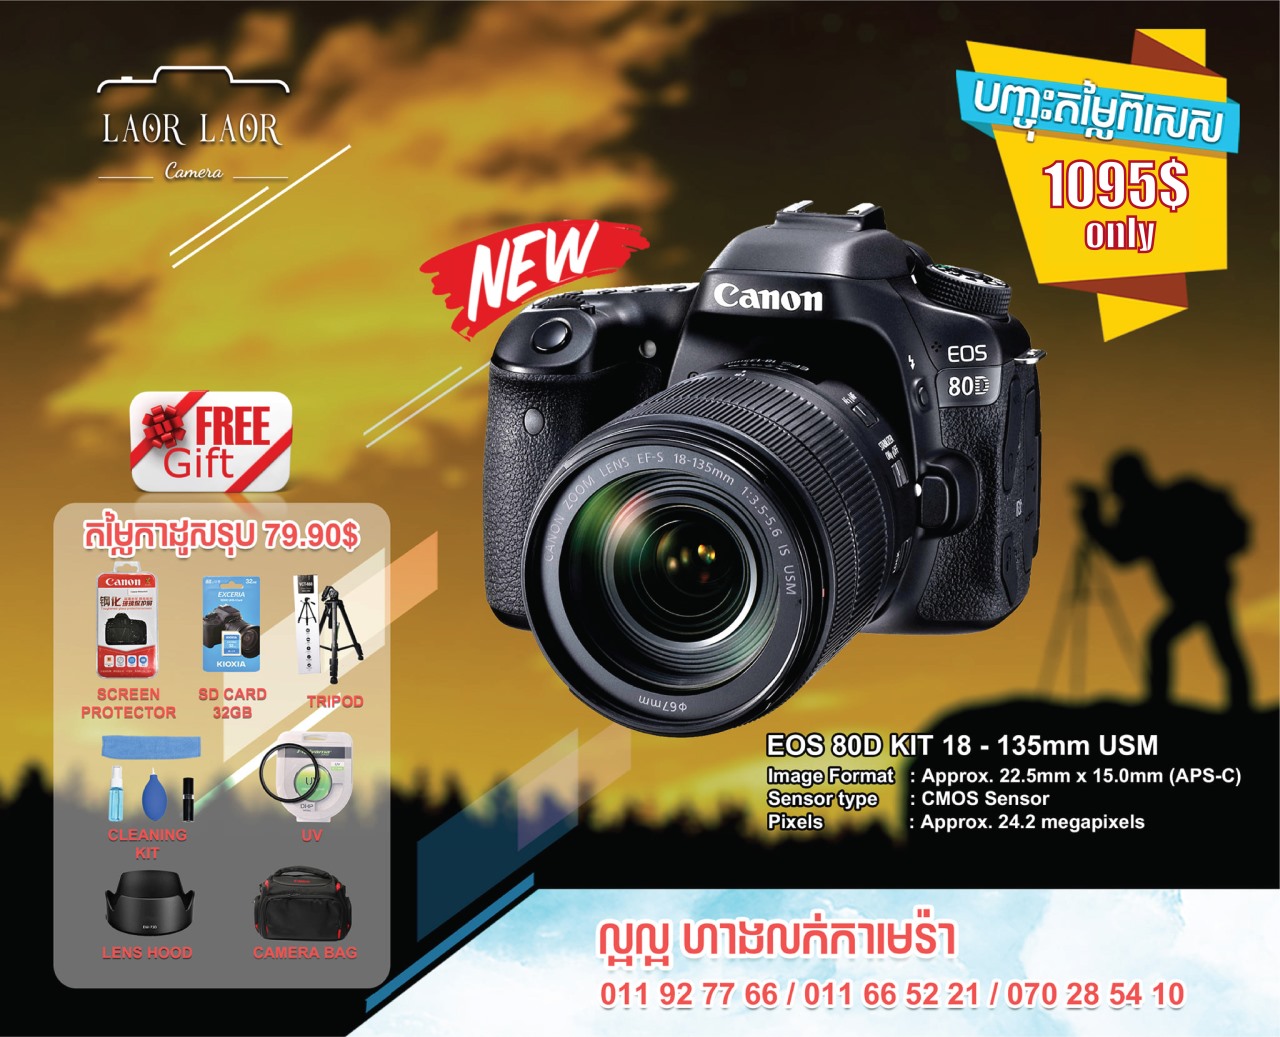 Canon EOS 80D kit 18-135mm USM (set) - out of stock